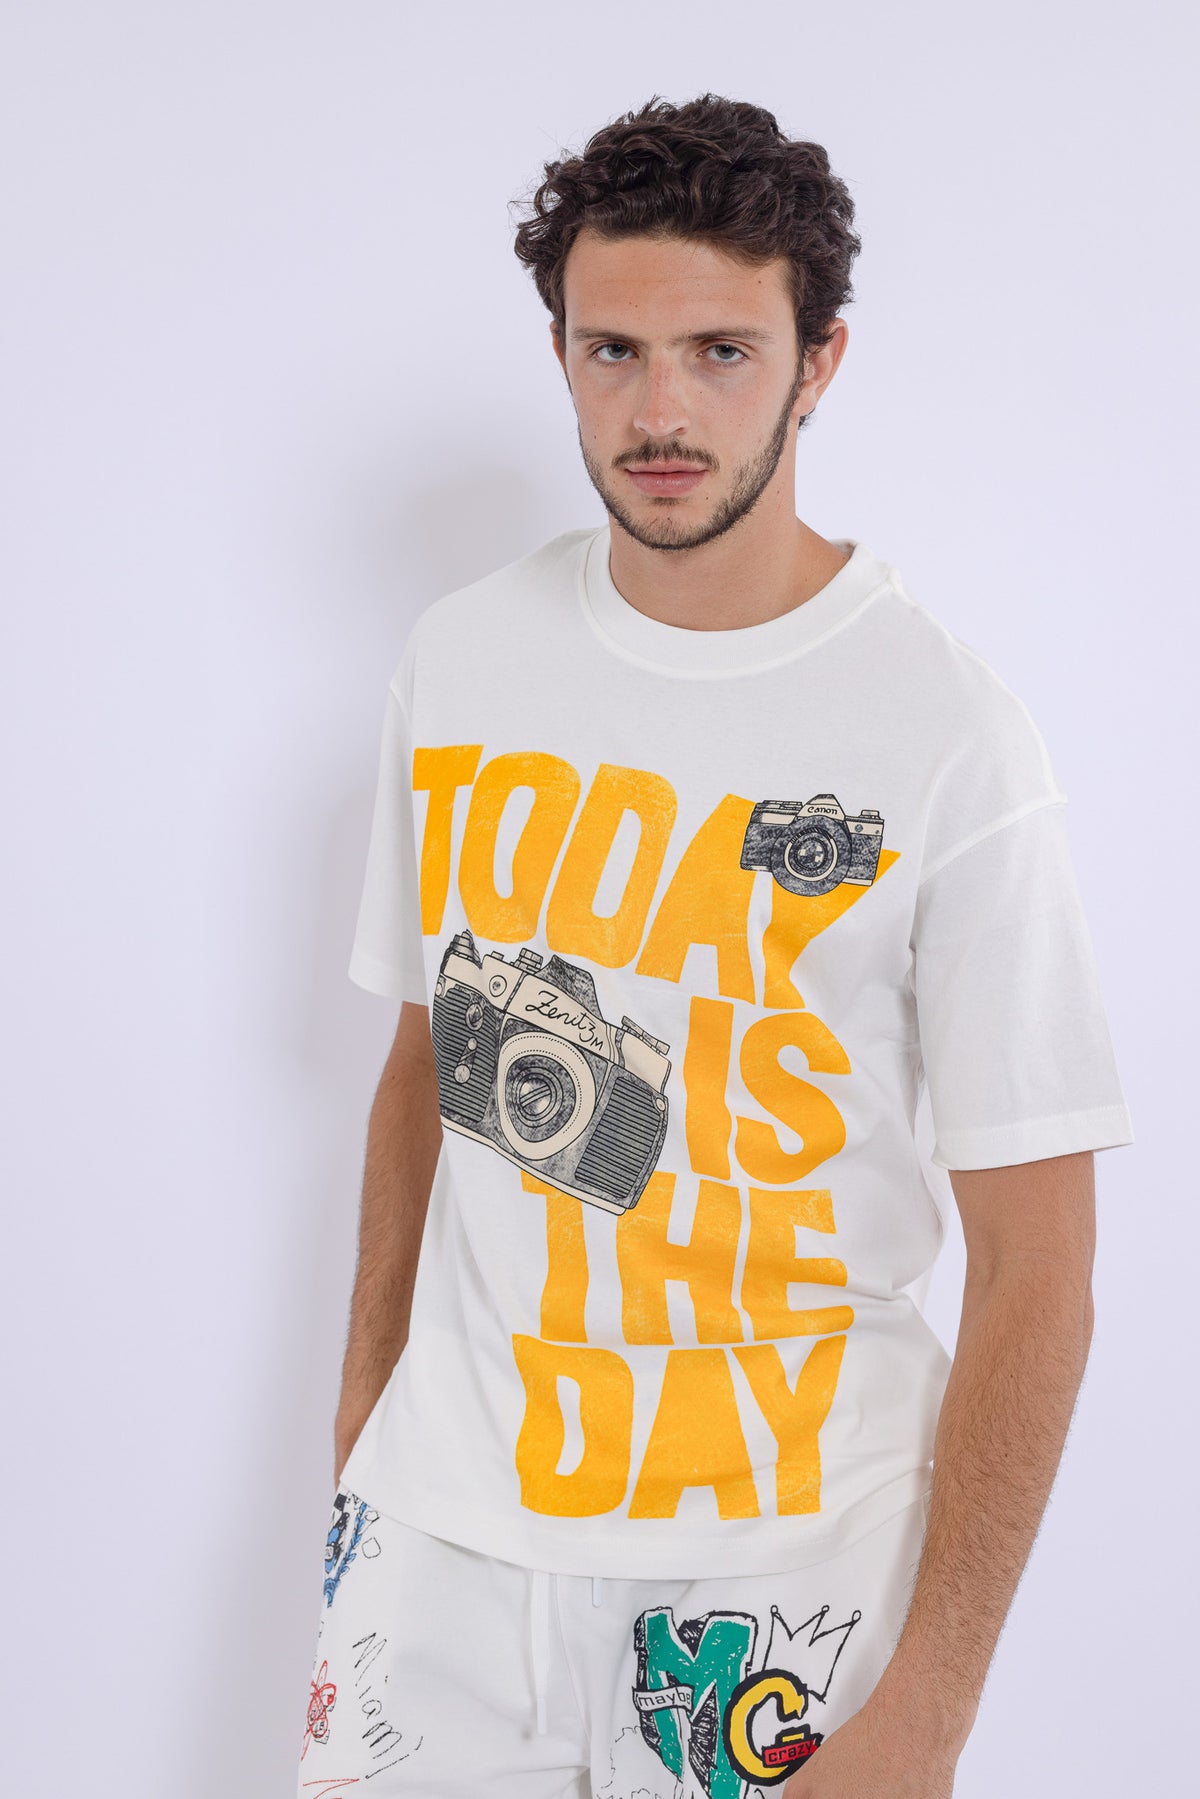 Today is the Day T-shirt